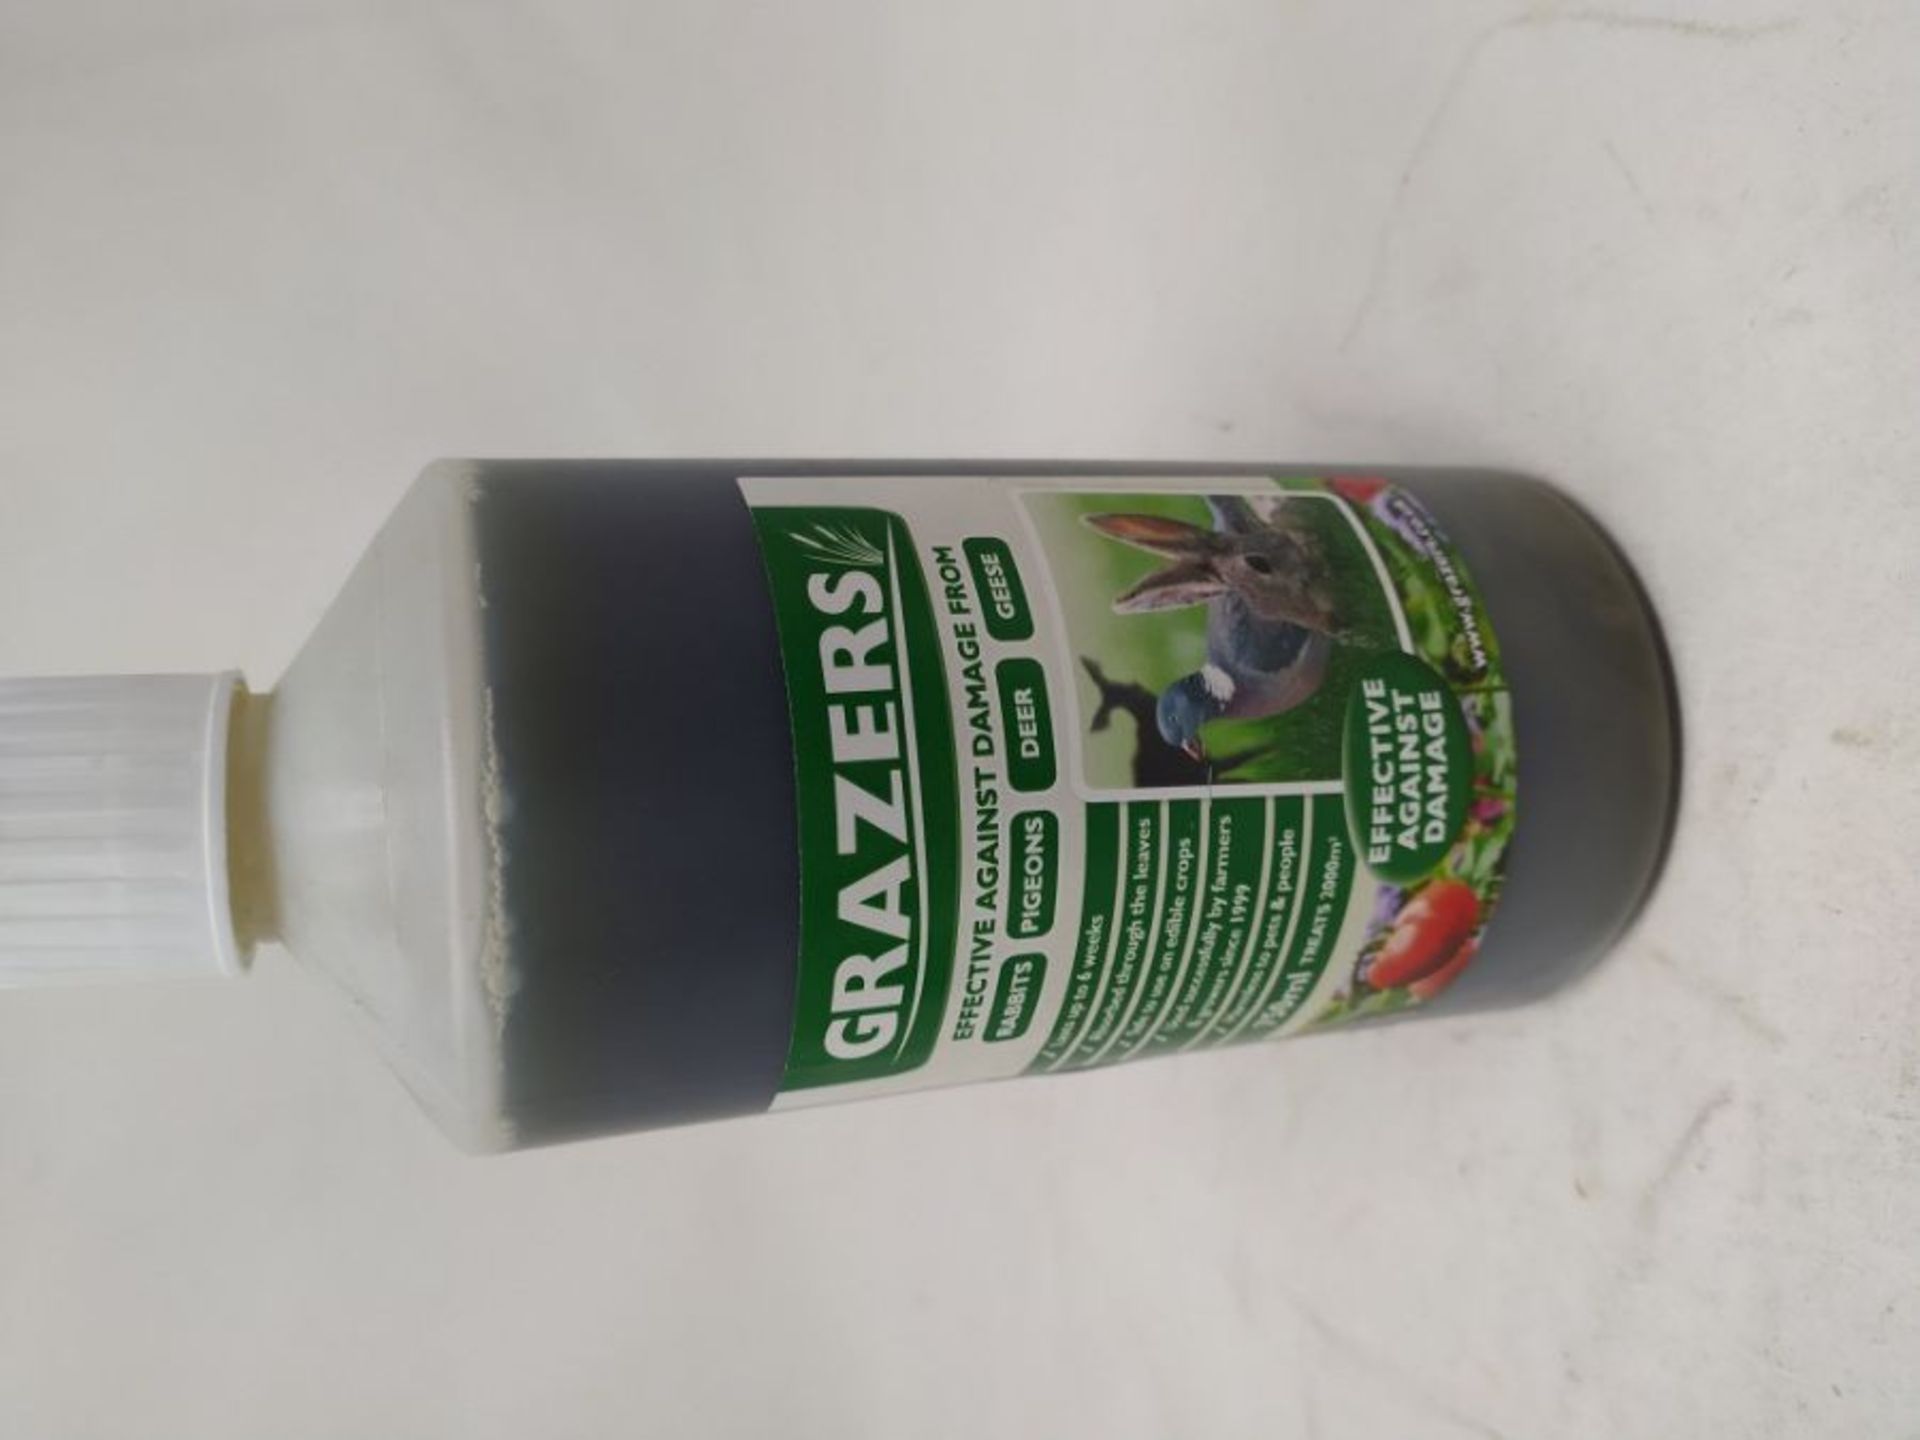 Grazers ltd GRAZERS G1 Concentrate 750ml Effective Against Damage from Rabbits, Pigeon - Image 4 of 4